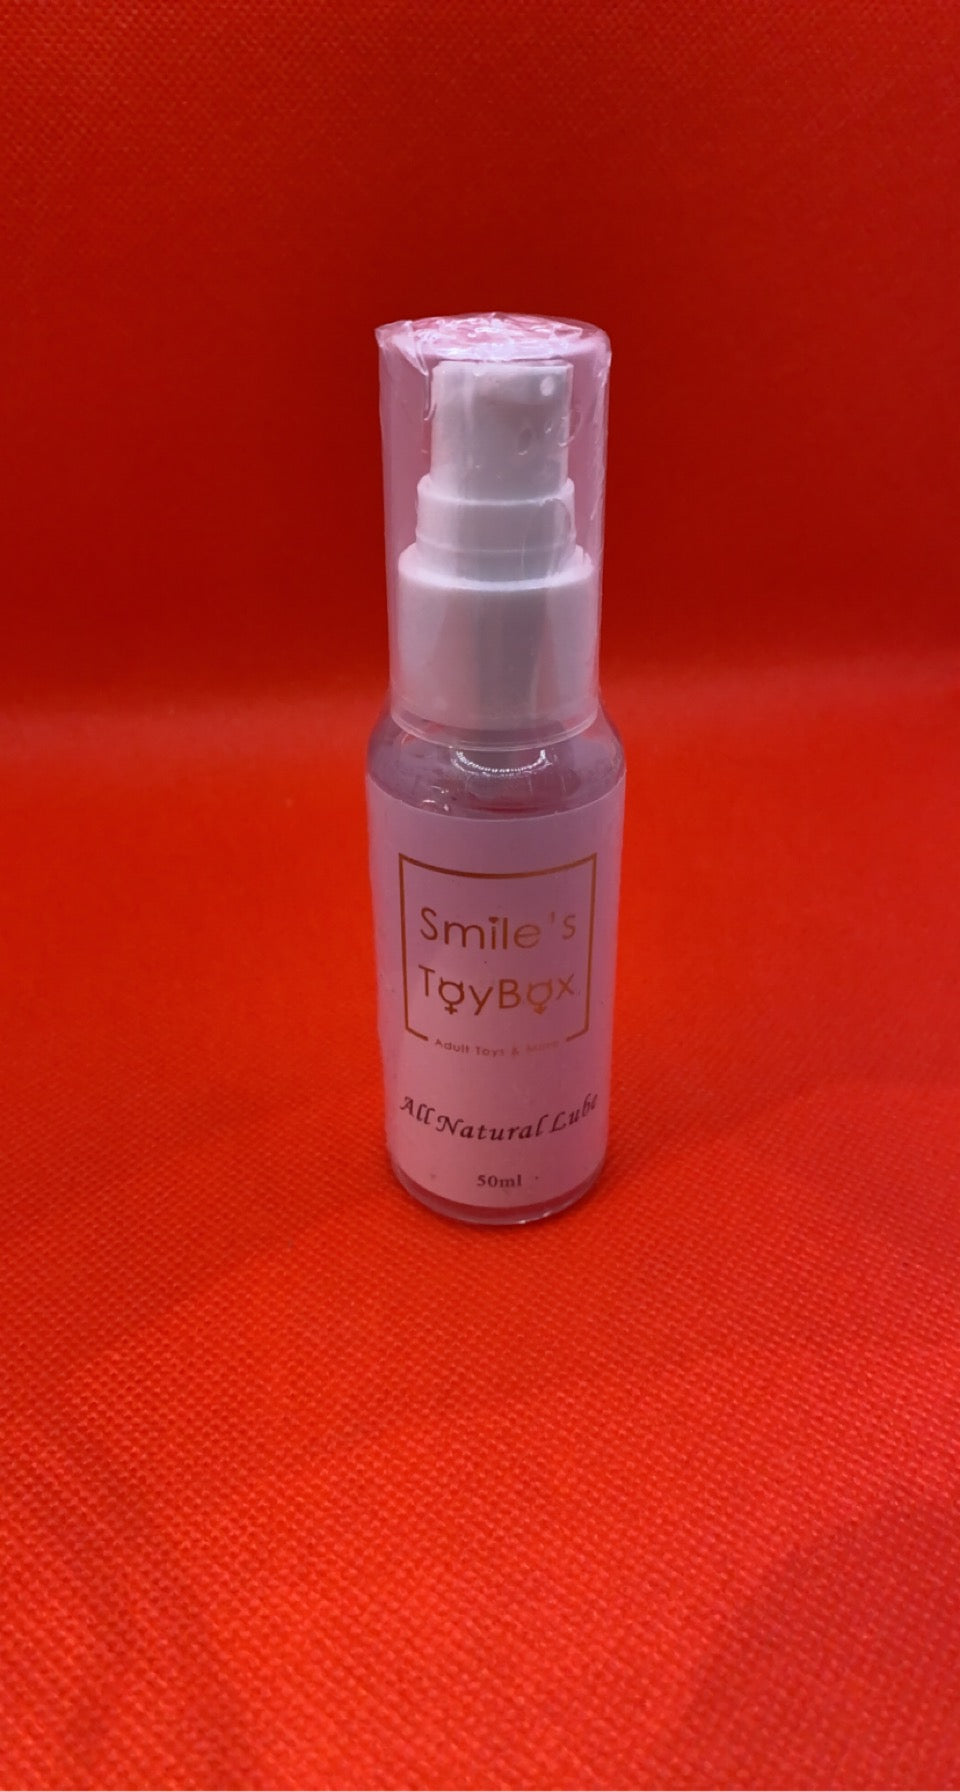 Smile’s All Natural Lube